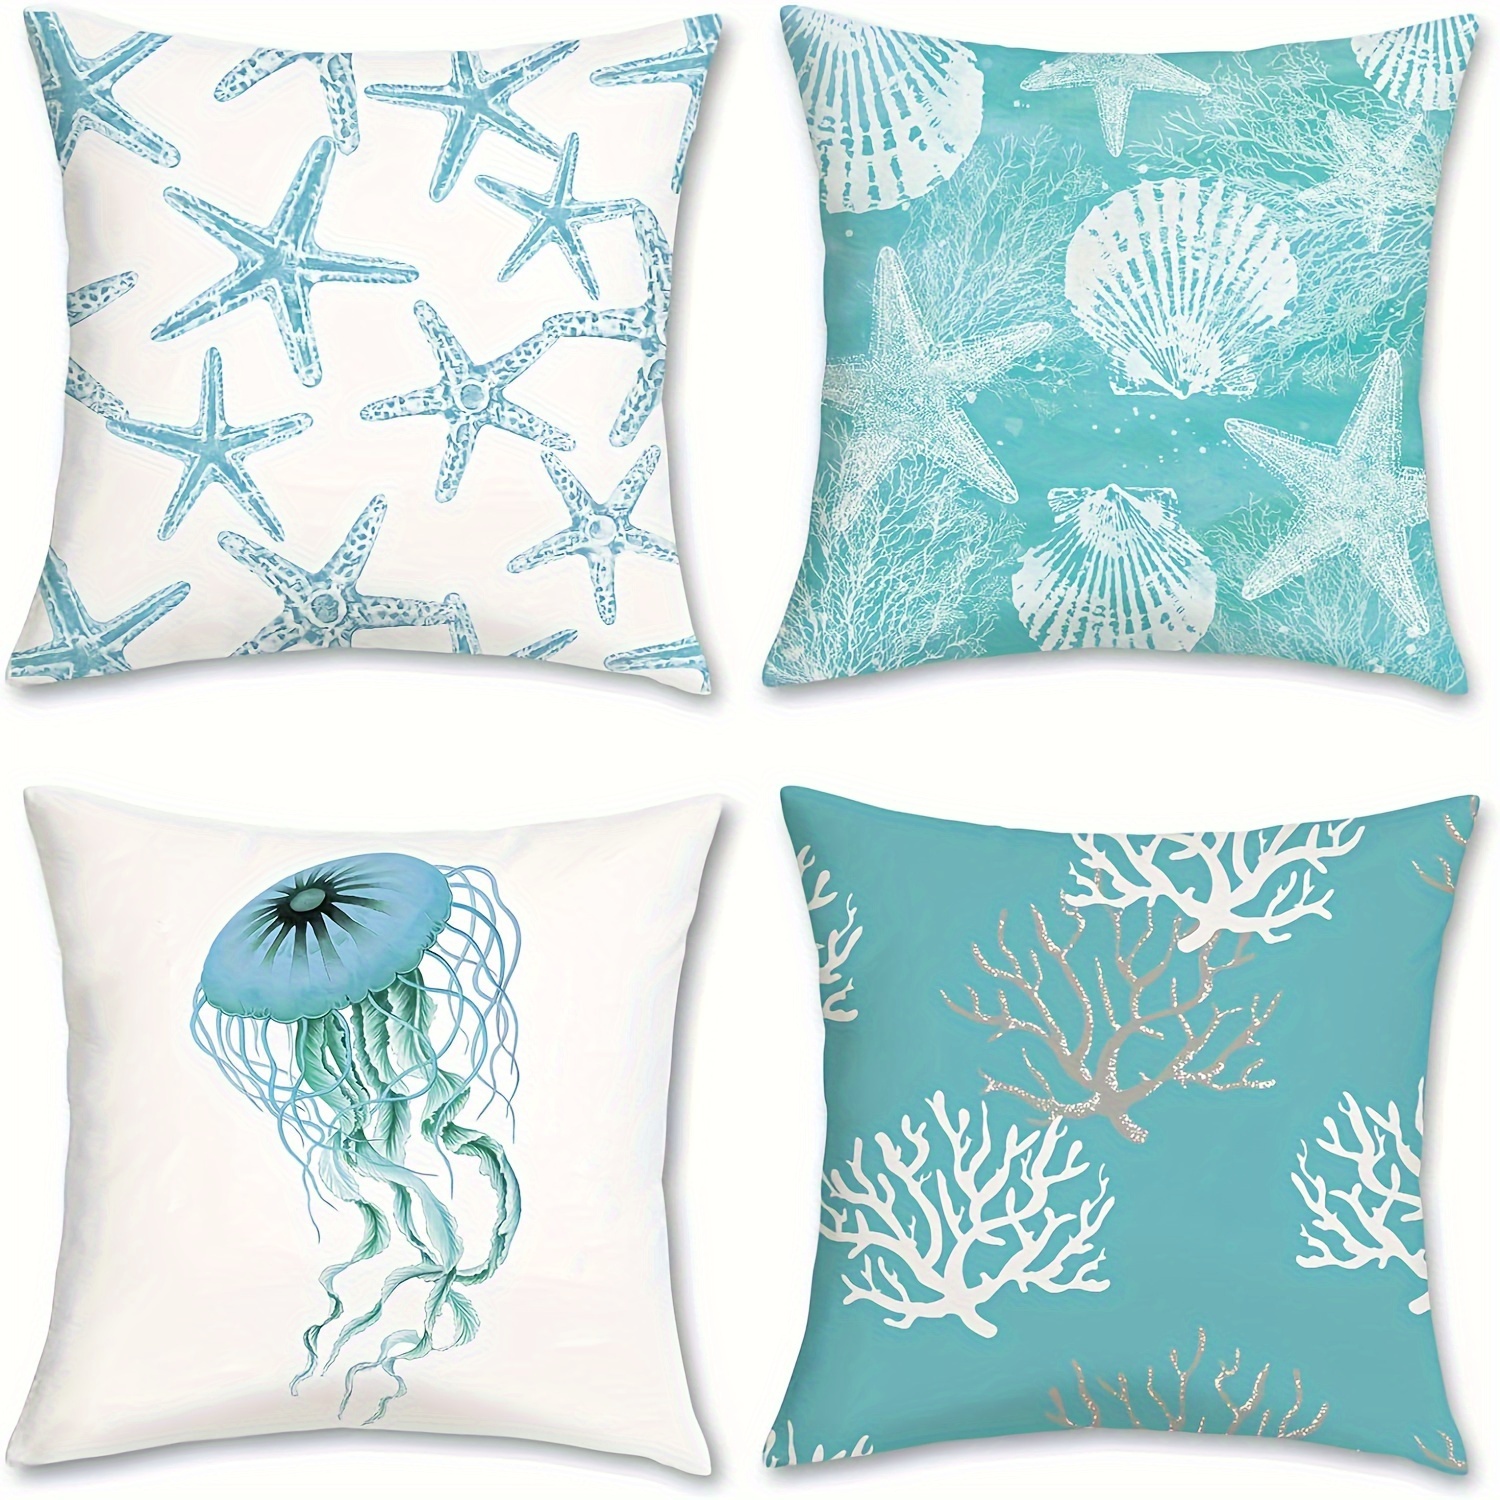 

4pcs Coastal Pillow Covers 18x18 Inch Beach Starfish Shell Ocean Coral Jellyfish Pillowcase Soft Velvet Outdoor For Couch Sofa Car Bedroom Home Decor